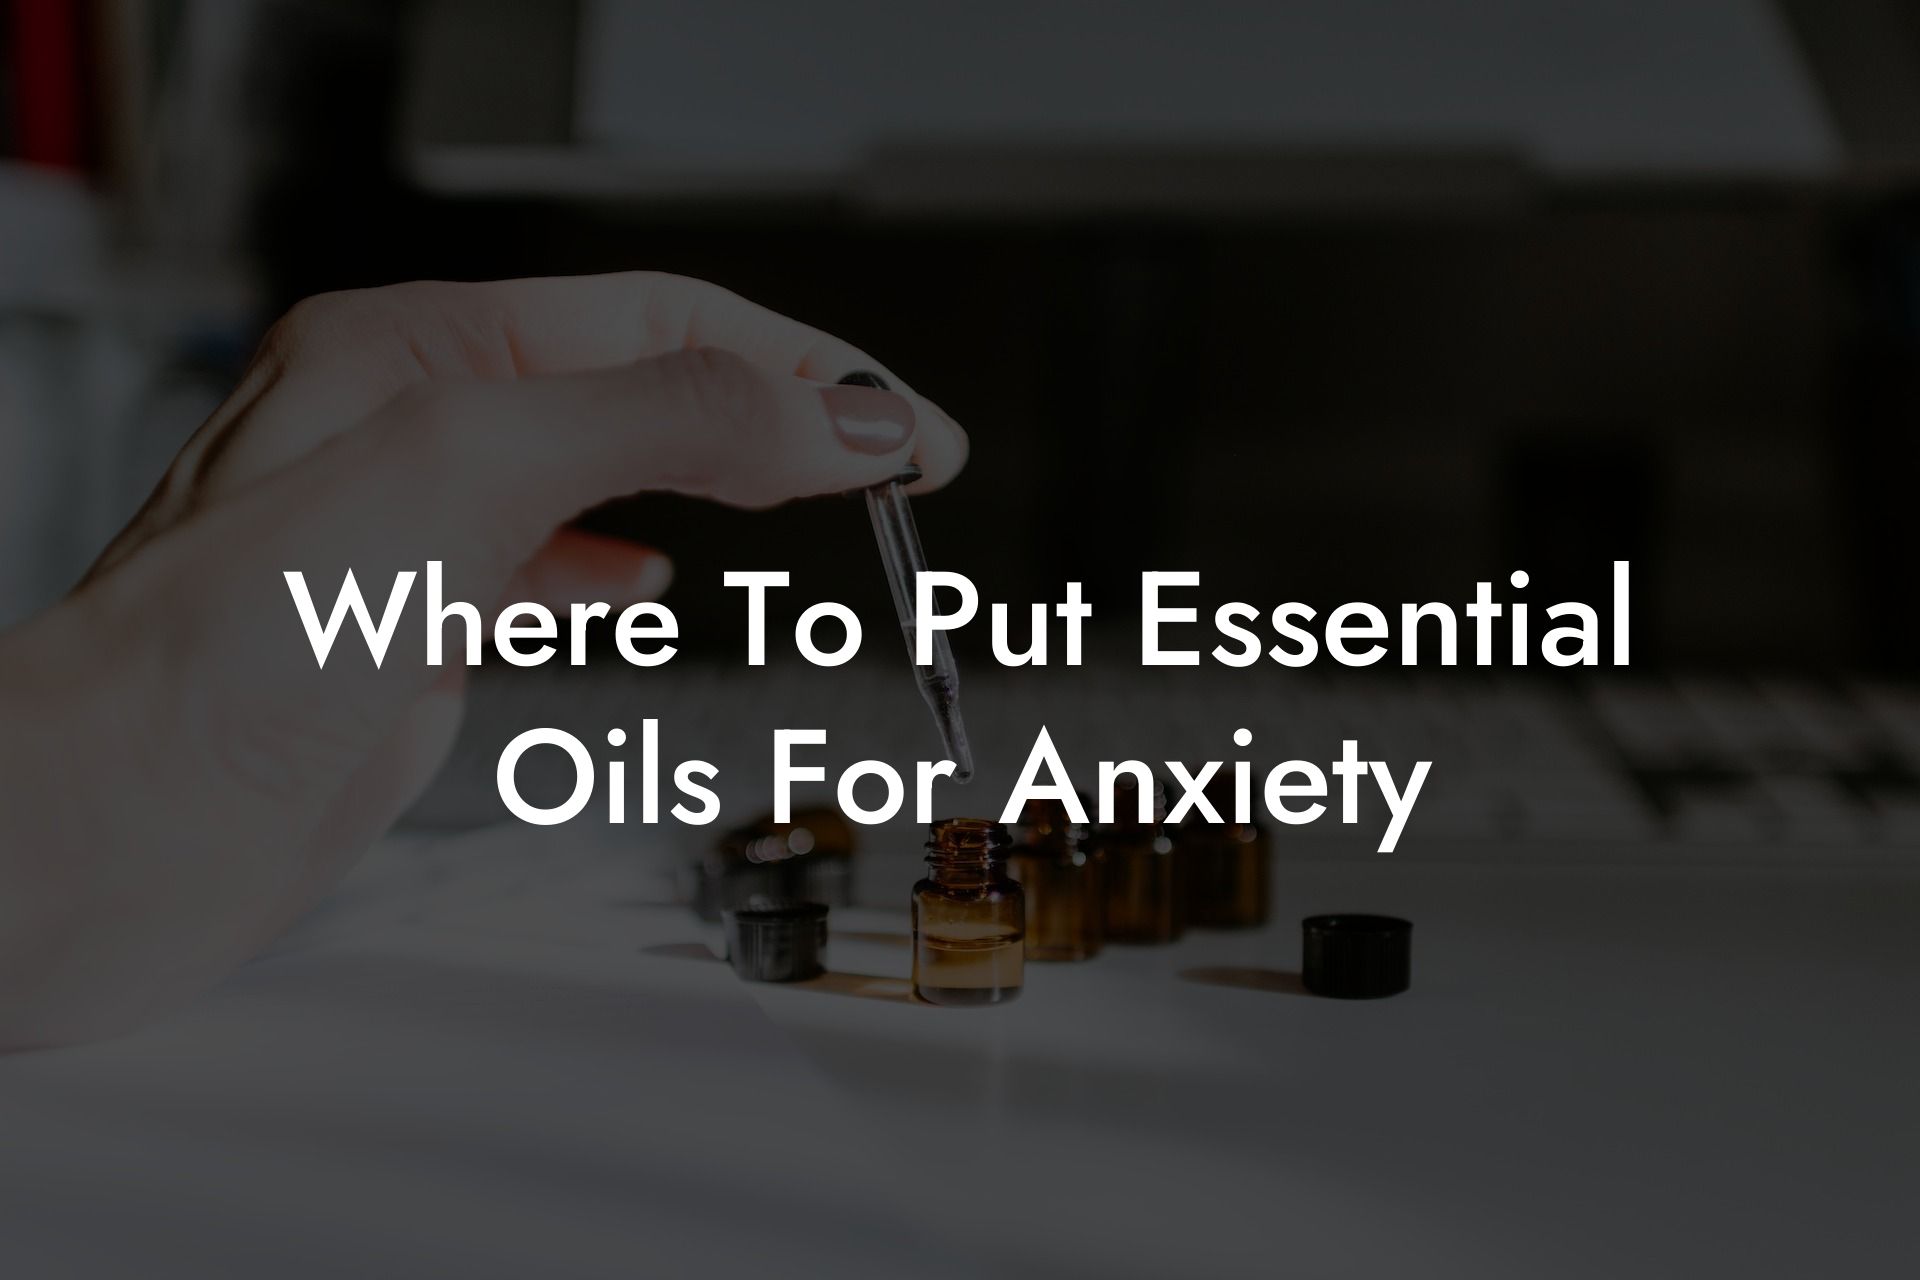 Where To Put Essential Oils For Anxiety